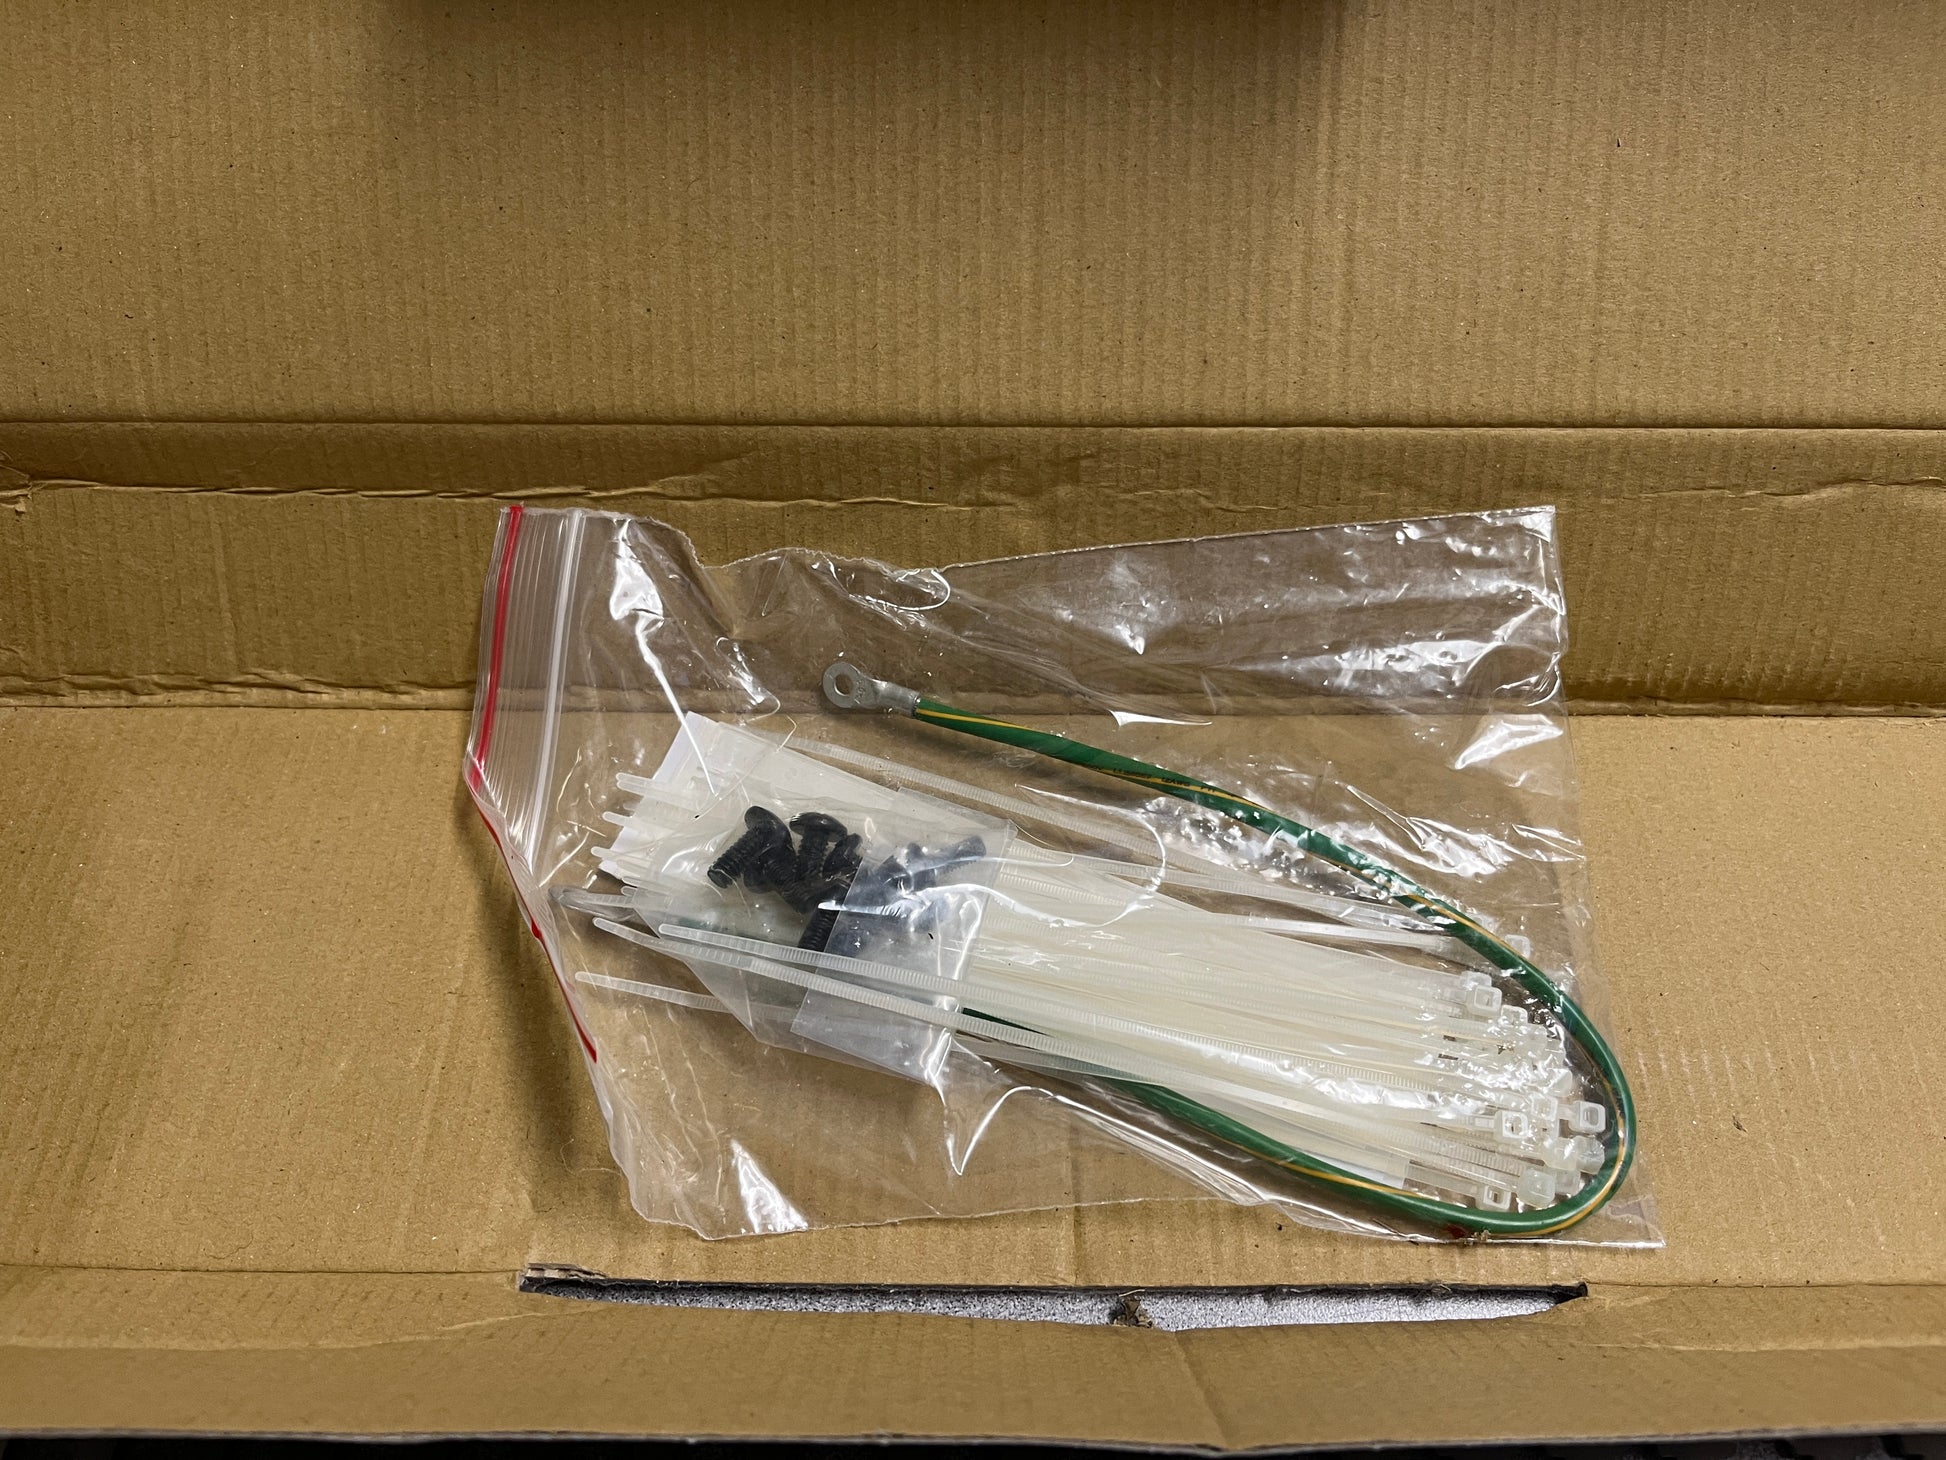 New Black Box JPS60A-24 Cat6 Patch Panel 24 Port Shielded, NIB for Sale. We Sell Professional Audio Equipment. Audio Systems, Amplifiers, Consoles, Mixers, Electronics, Entertainment and Live Sound.